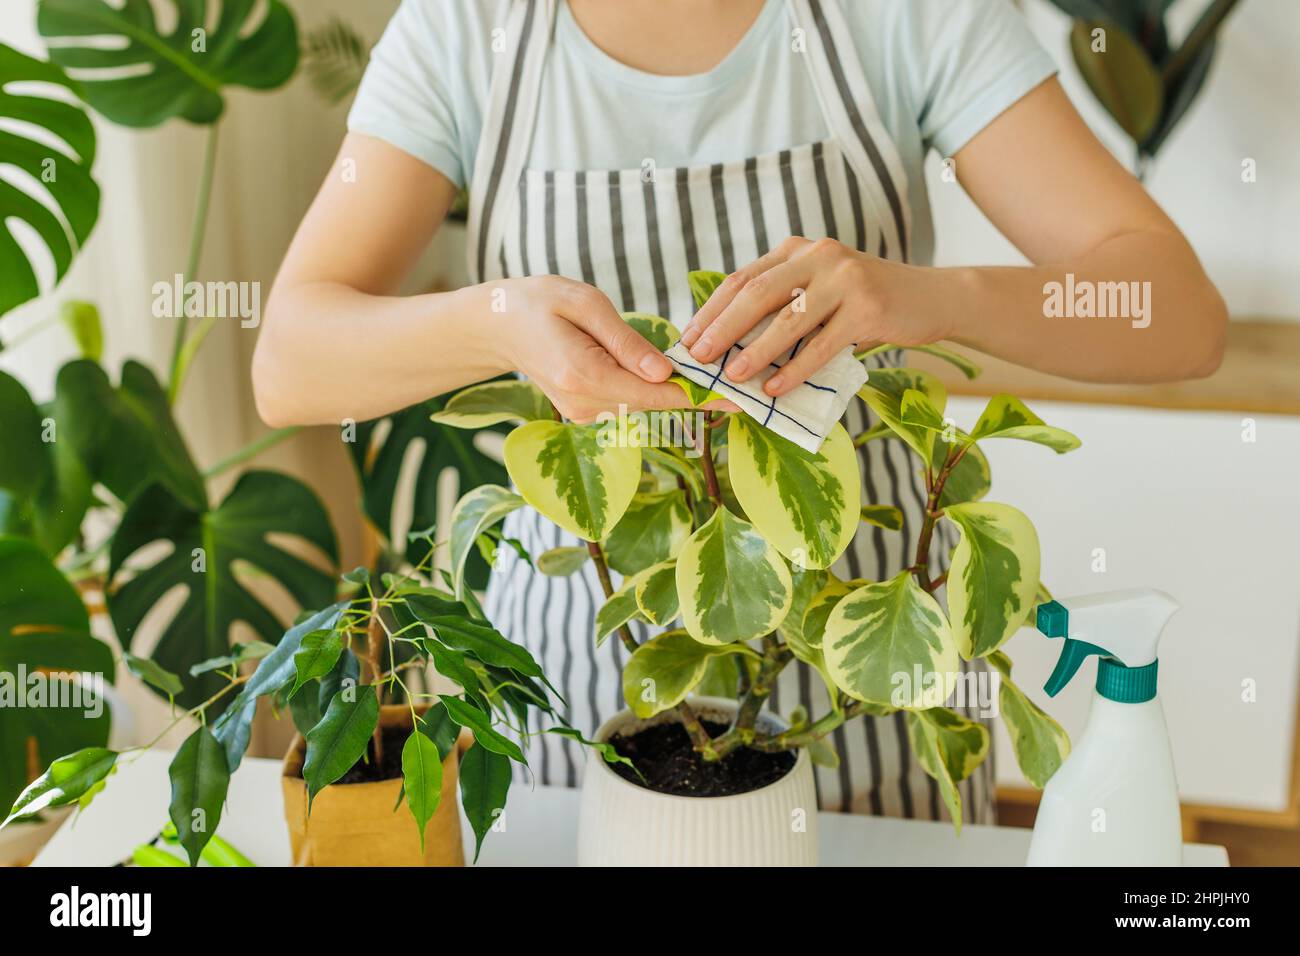 Woman in apron spraying and cleaning houseplants at home. Springtime to care plants. Concept of gardening, hobby, domestic lifestyle. Stock Photo